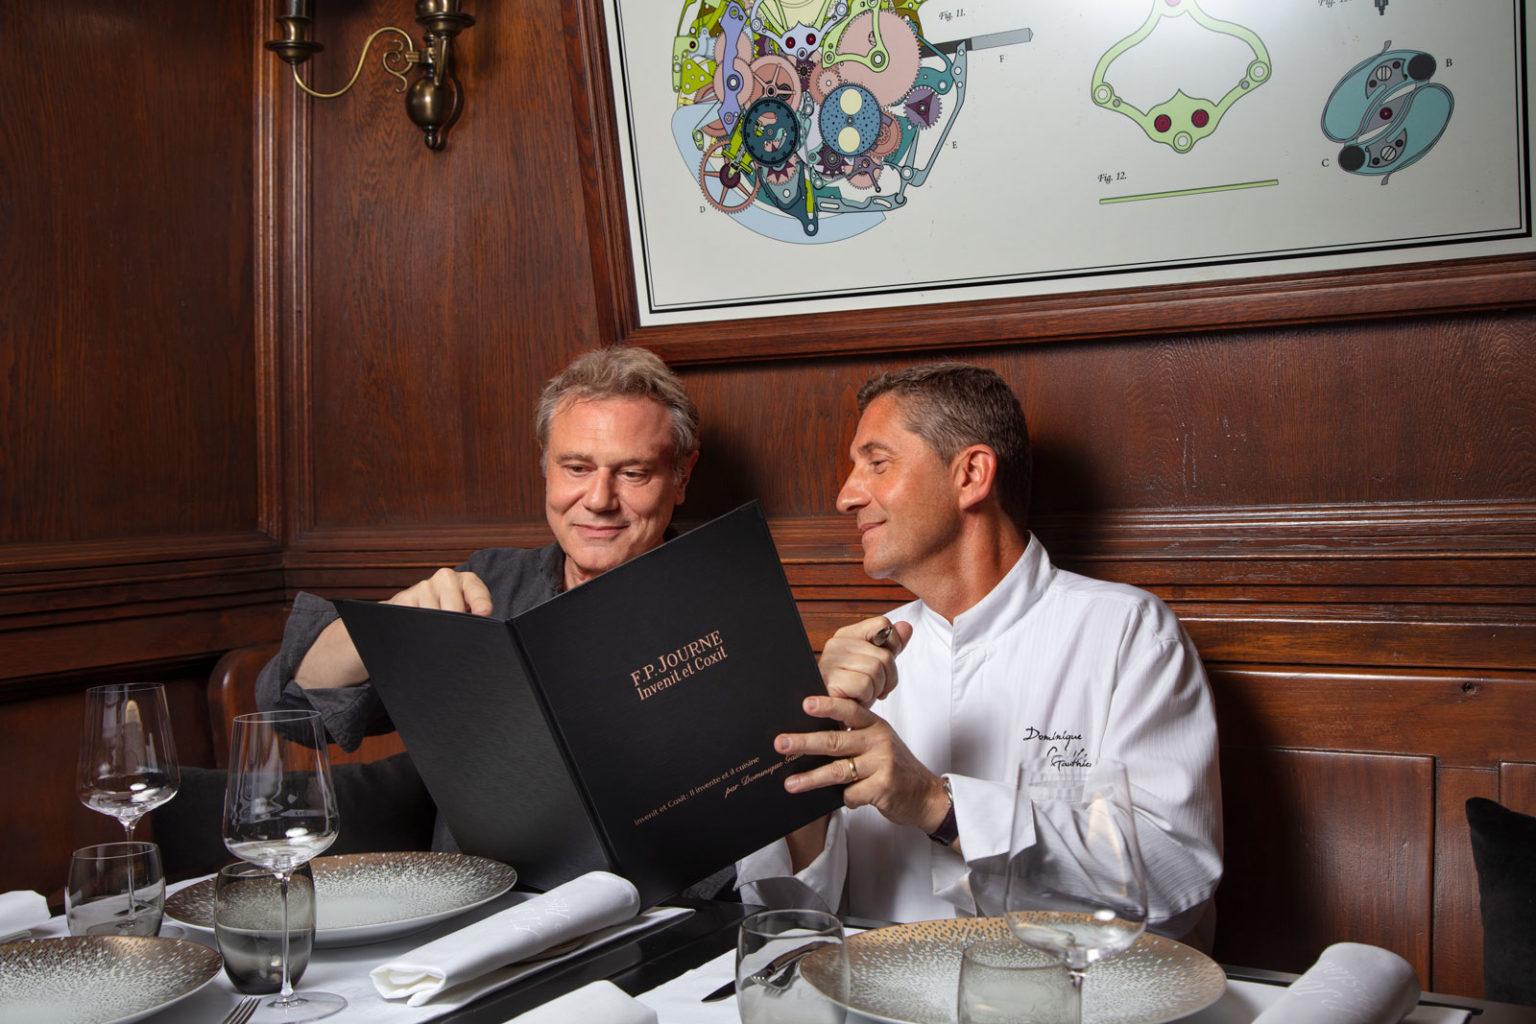 "F.P.Journe Le Restaurant" by François-Paul Journe and Michelin-starred chef Dominique Gauthier